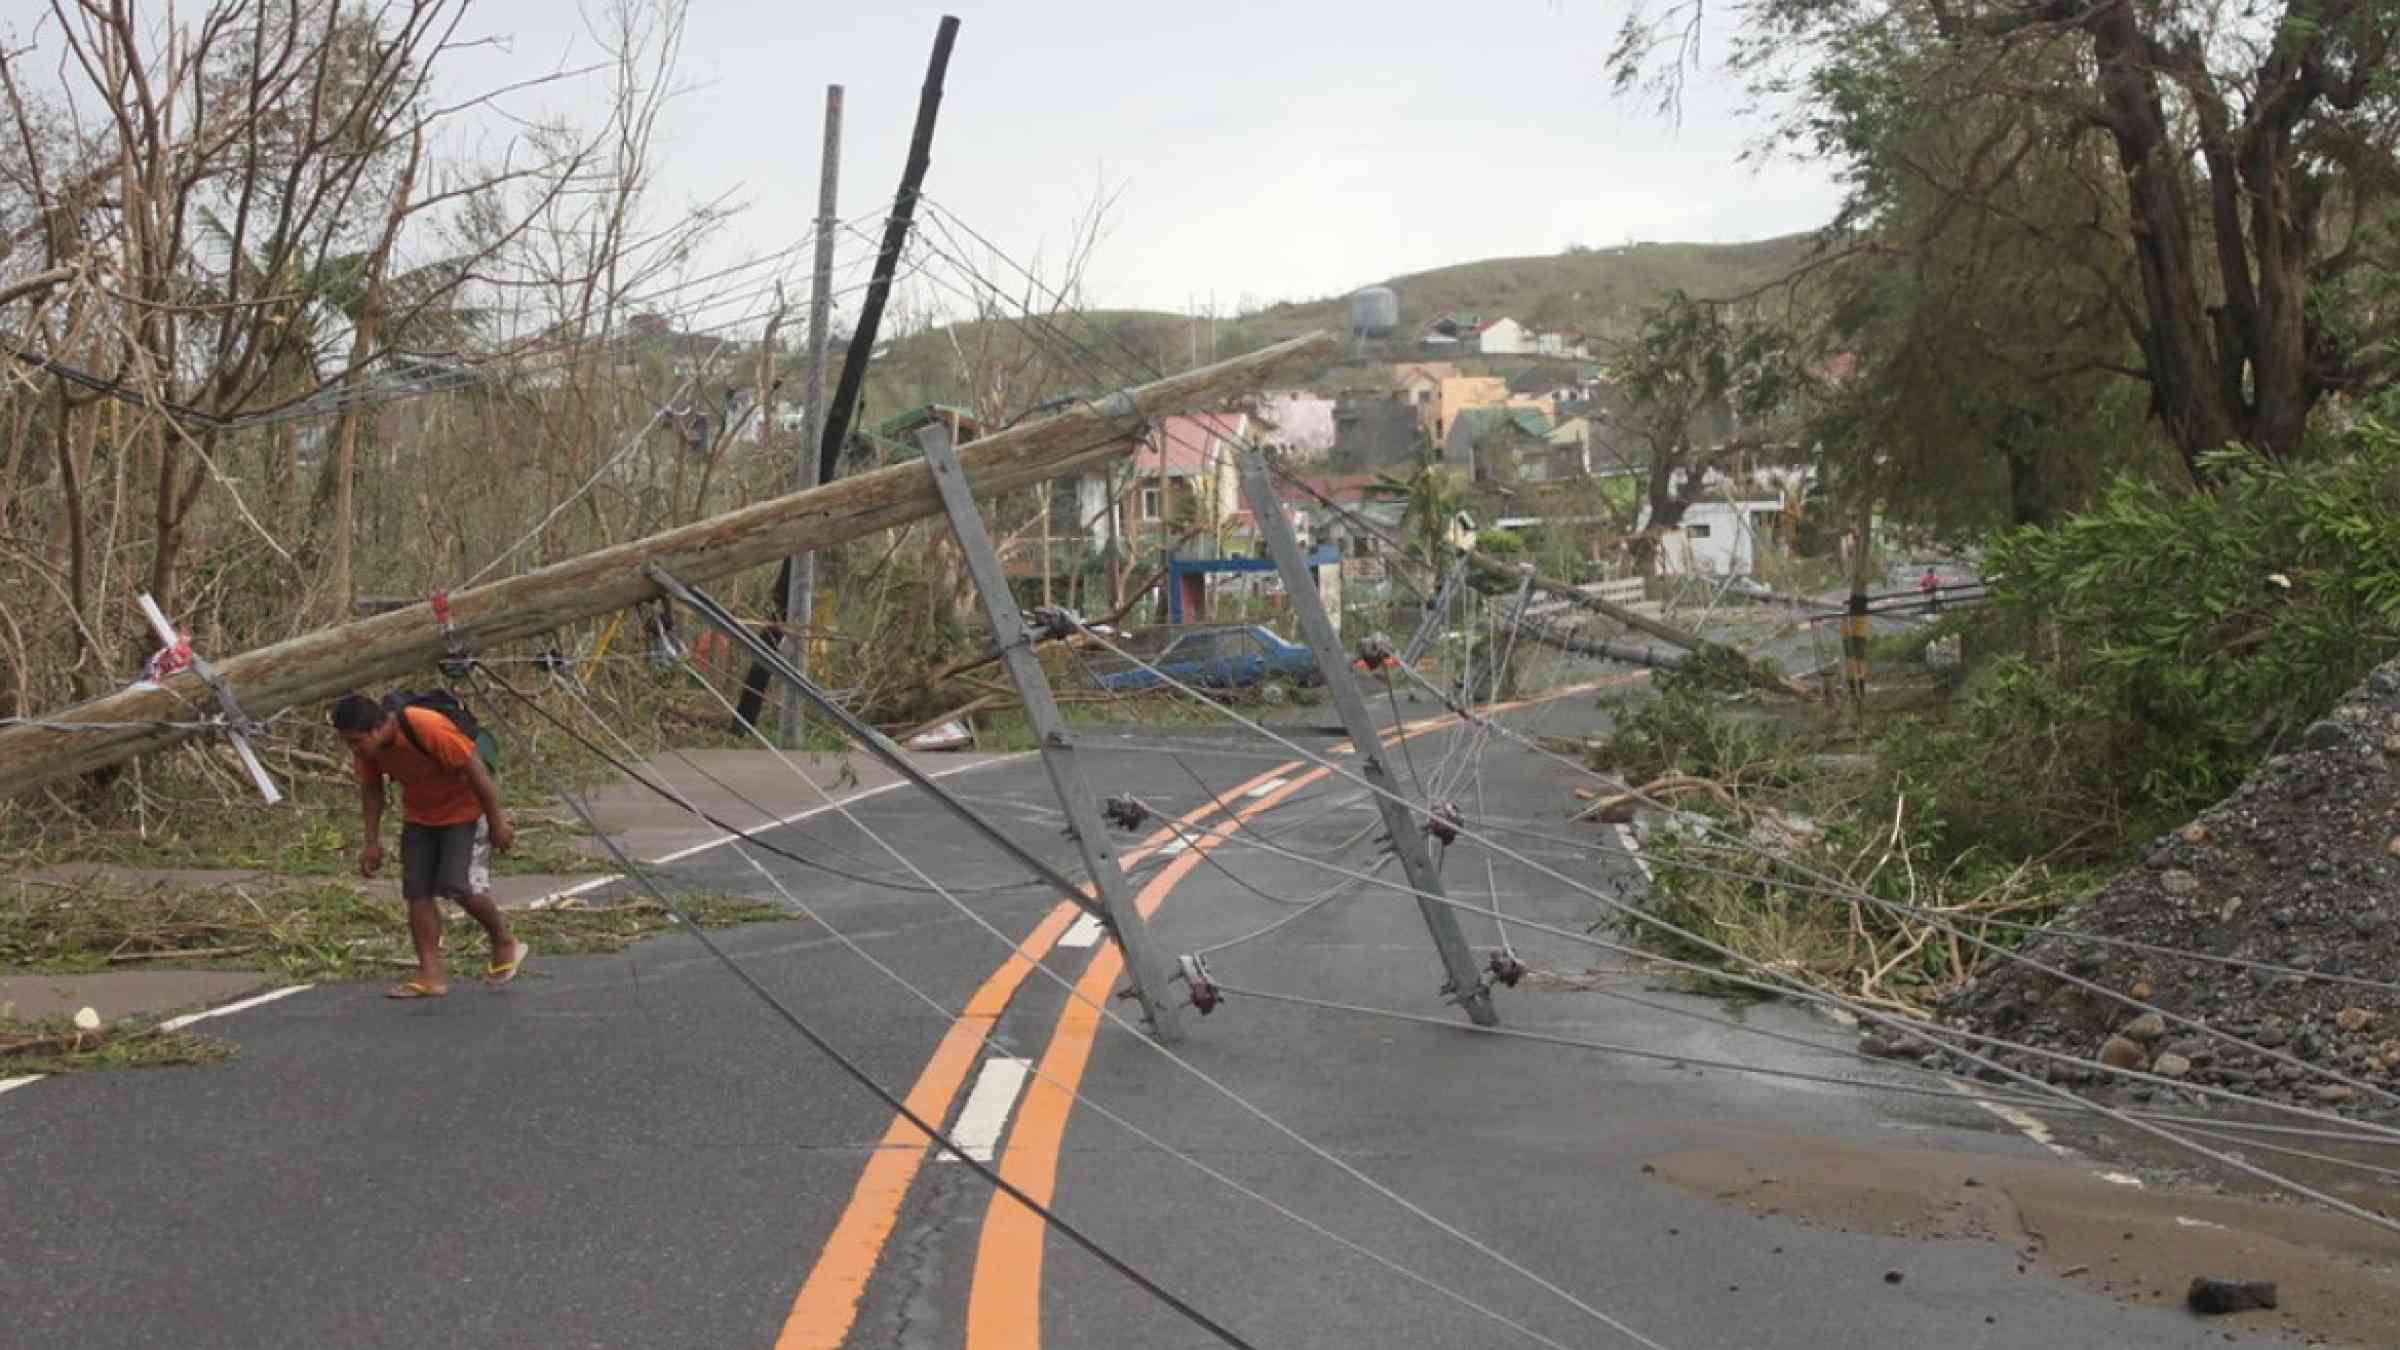 A villager crosses a road blocked by a toppled utility pole in the aftermath of Typhoon Haima